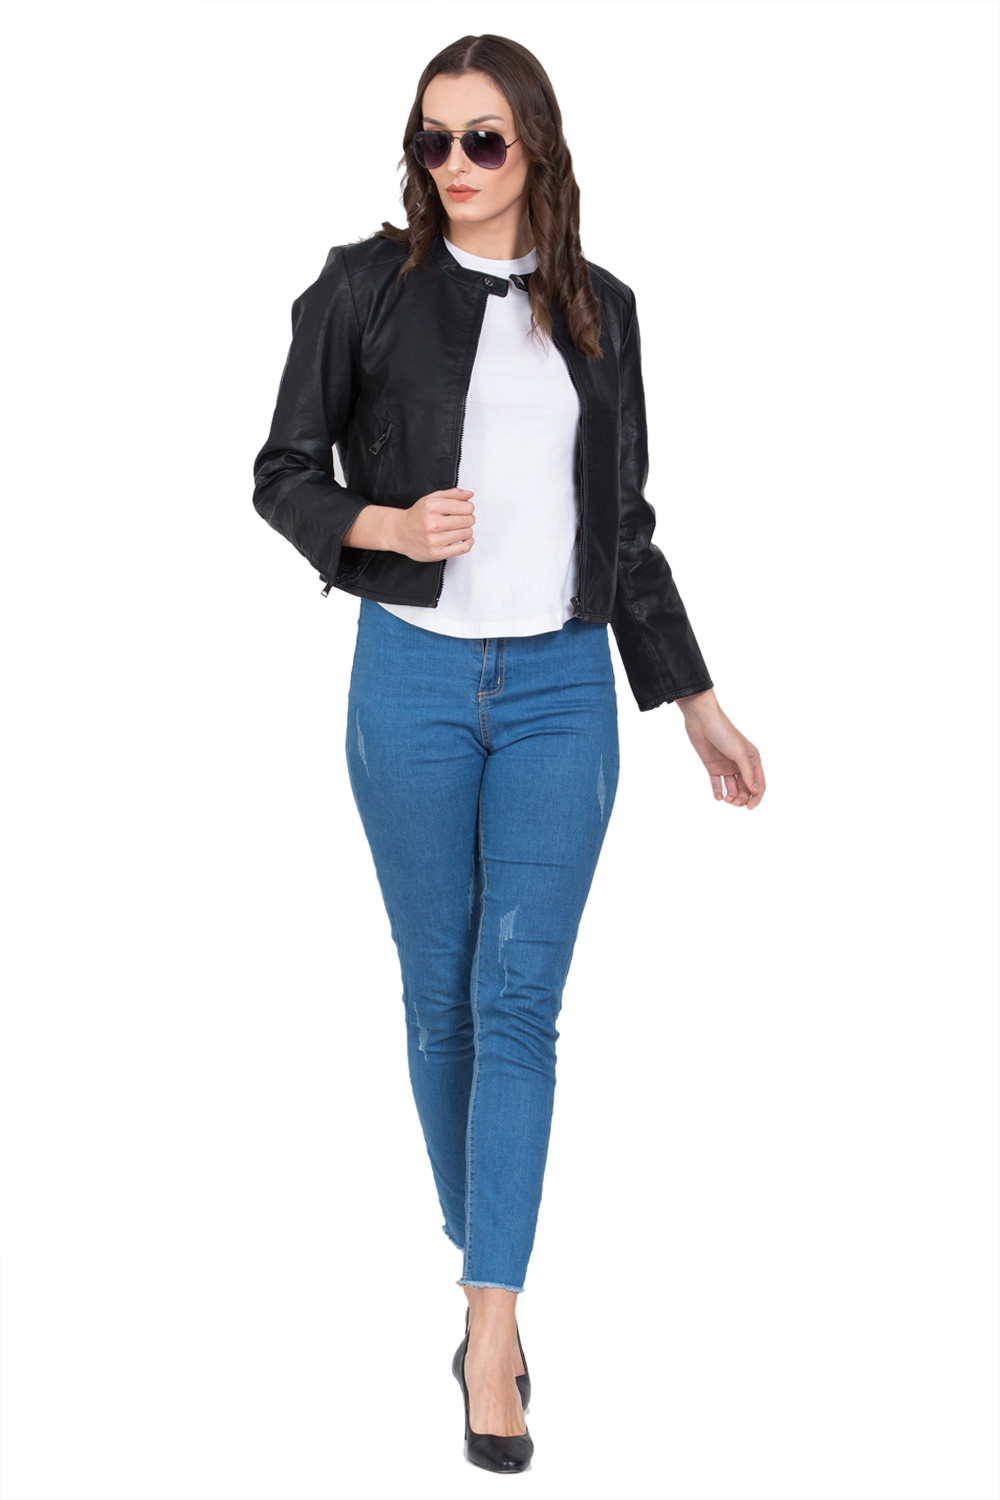 Justanned | JUSTANNED CHARCOAL WOMEN LEATHER JACKET 6